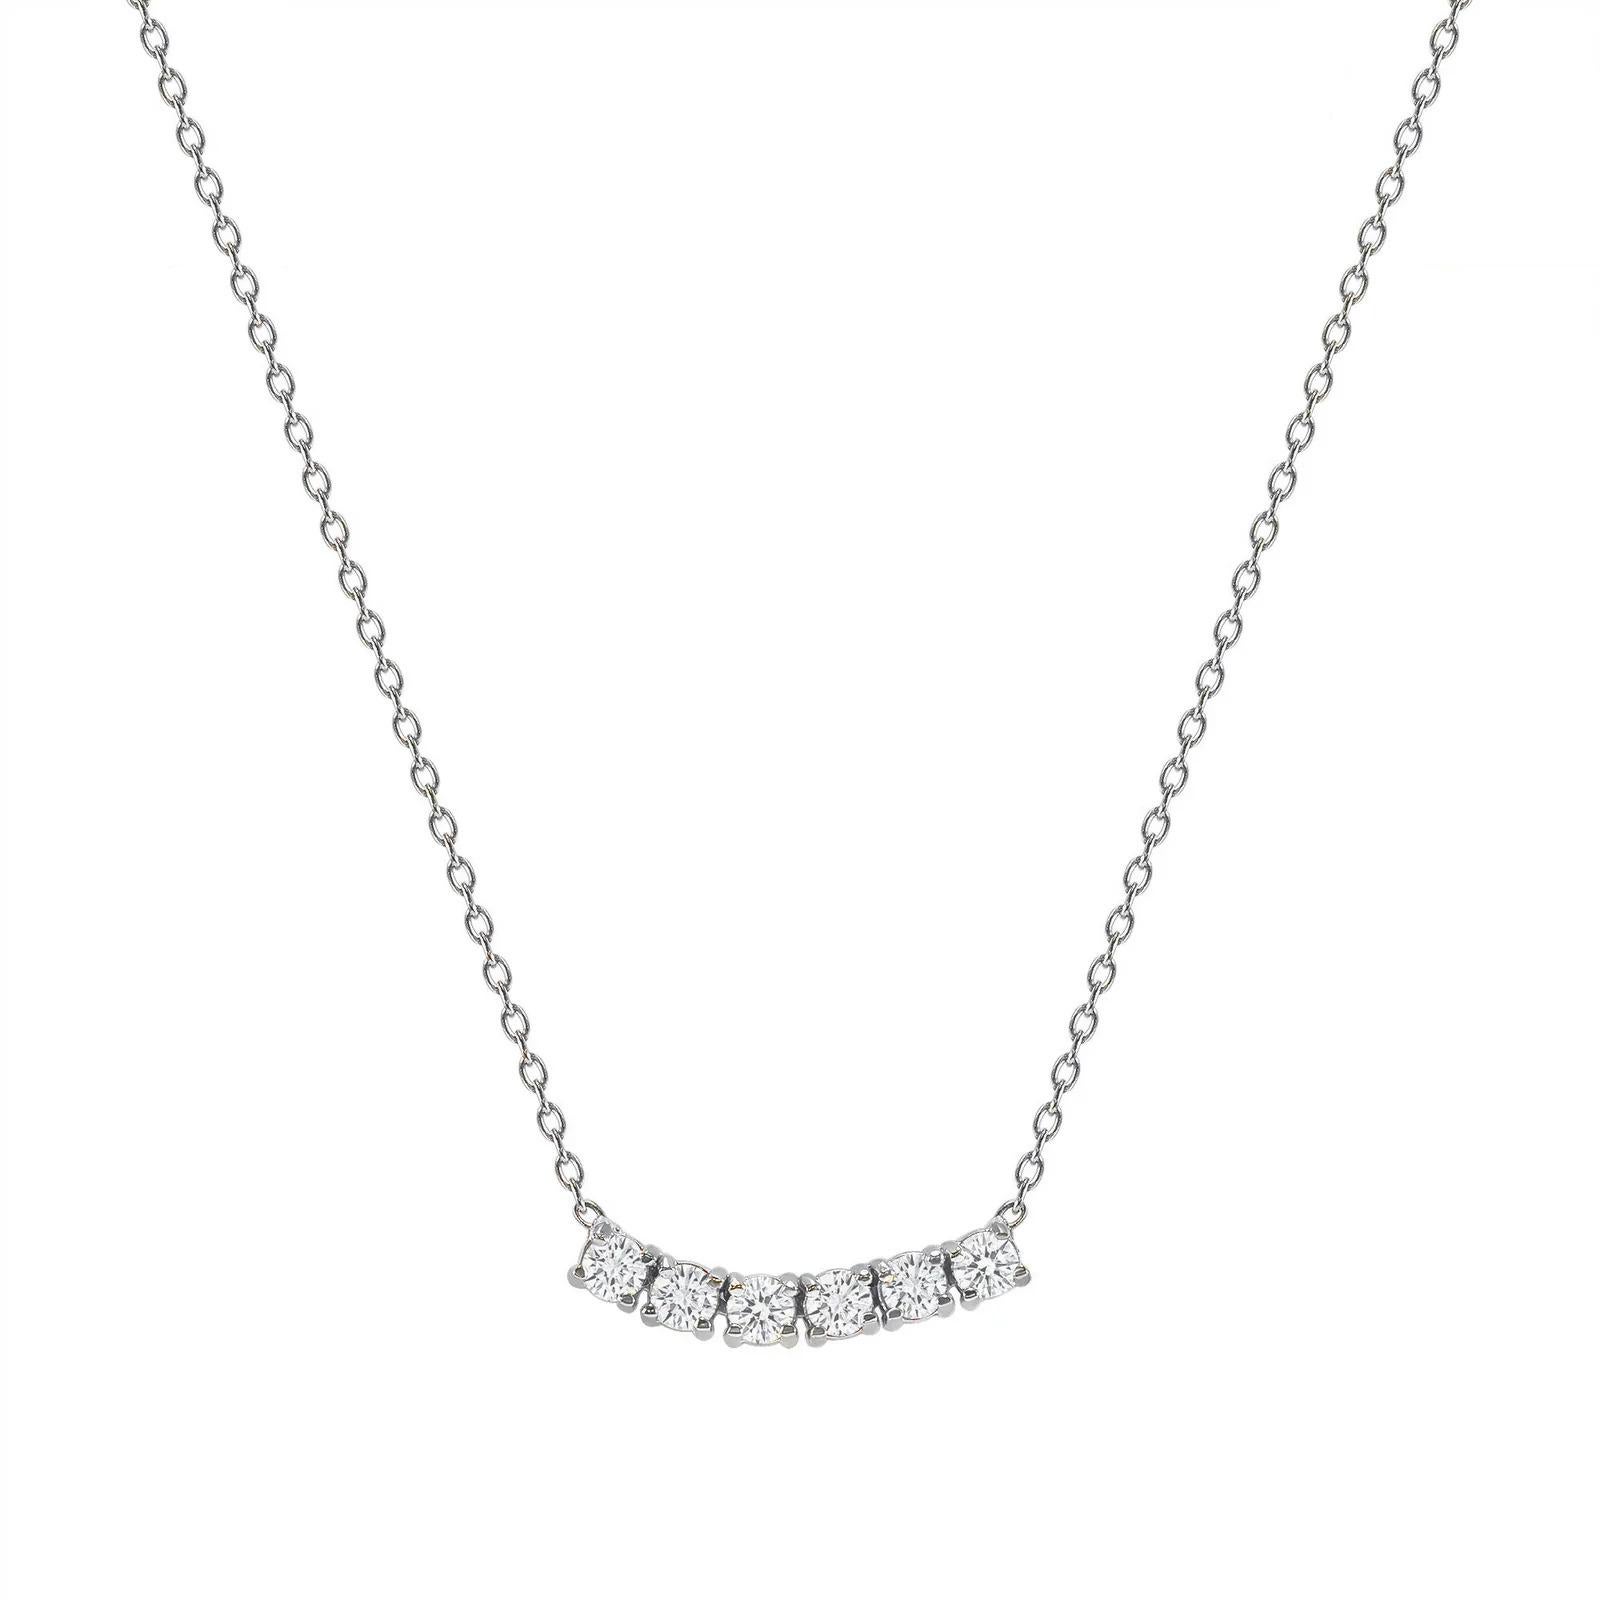 This petite, curved diamond necklace is crafted with gorgeous 14k gold set with six round diamonds.  

Gold: 14k 
Diamond Total Carats: 0.25ct
Diamond Cut: Round (6 diamonds)
Diamond Clarity: VS
Diamond Color: F
Color: White Gold
Necklace Length: 16